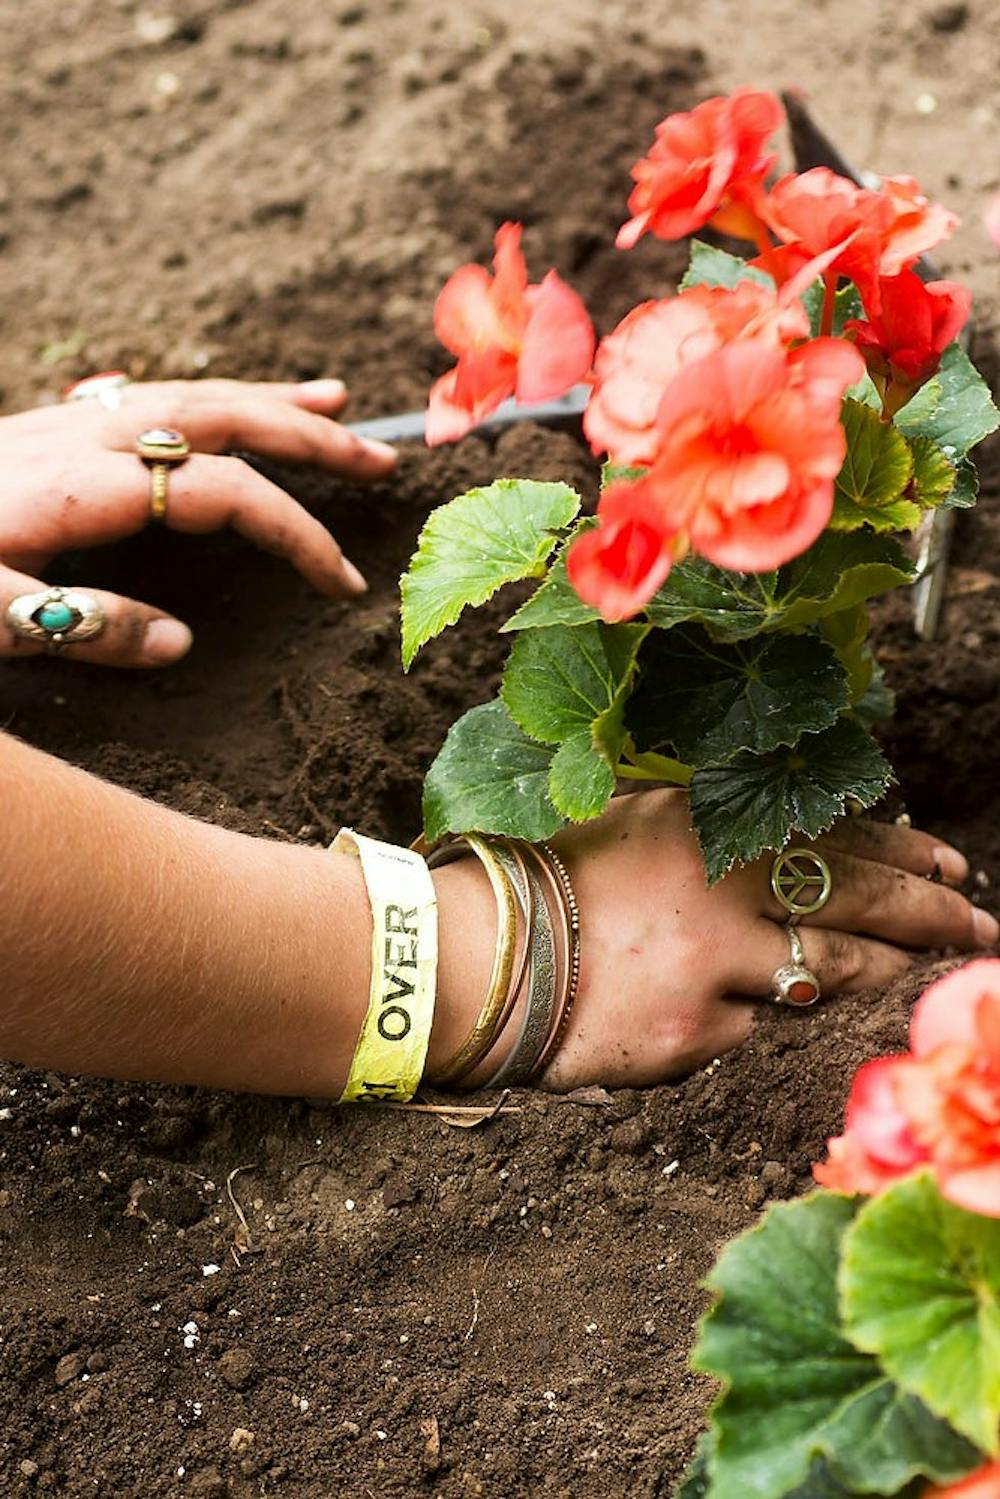 <p>Professional writing senior Olivia Monforton plants a flower June 10, 2014, in the W. J. Beal Botanical Garden. Monforton is in charge of planting all the annual beds in the garden and designs the layout of the flowers. Hayden Fennoy/The State News </p>